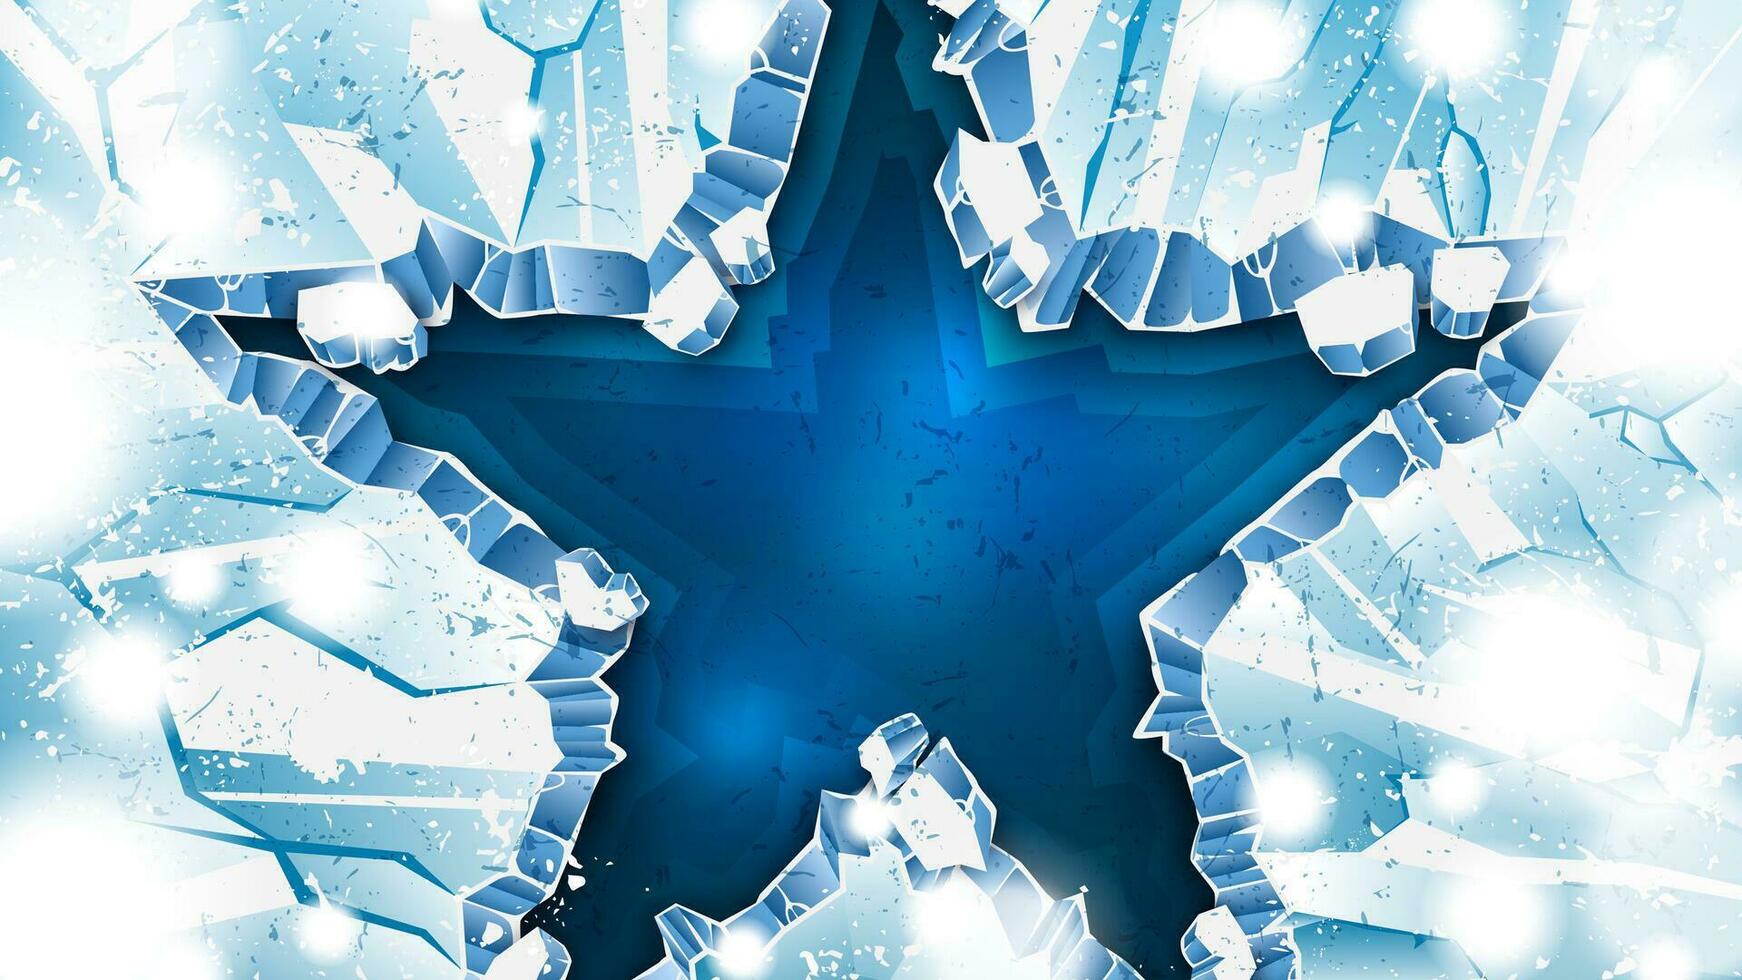 Star Shaped Ice Cracks As a Winter Background vector